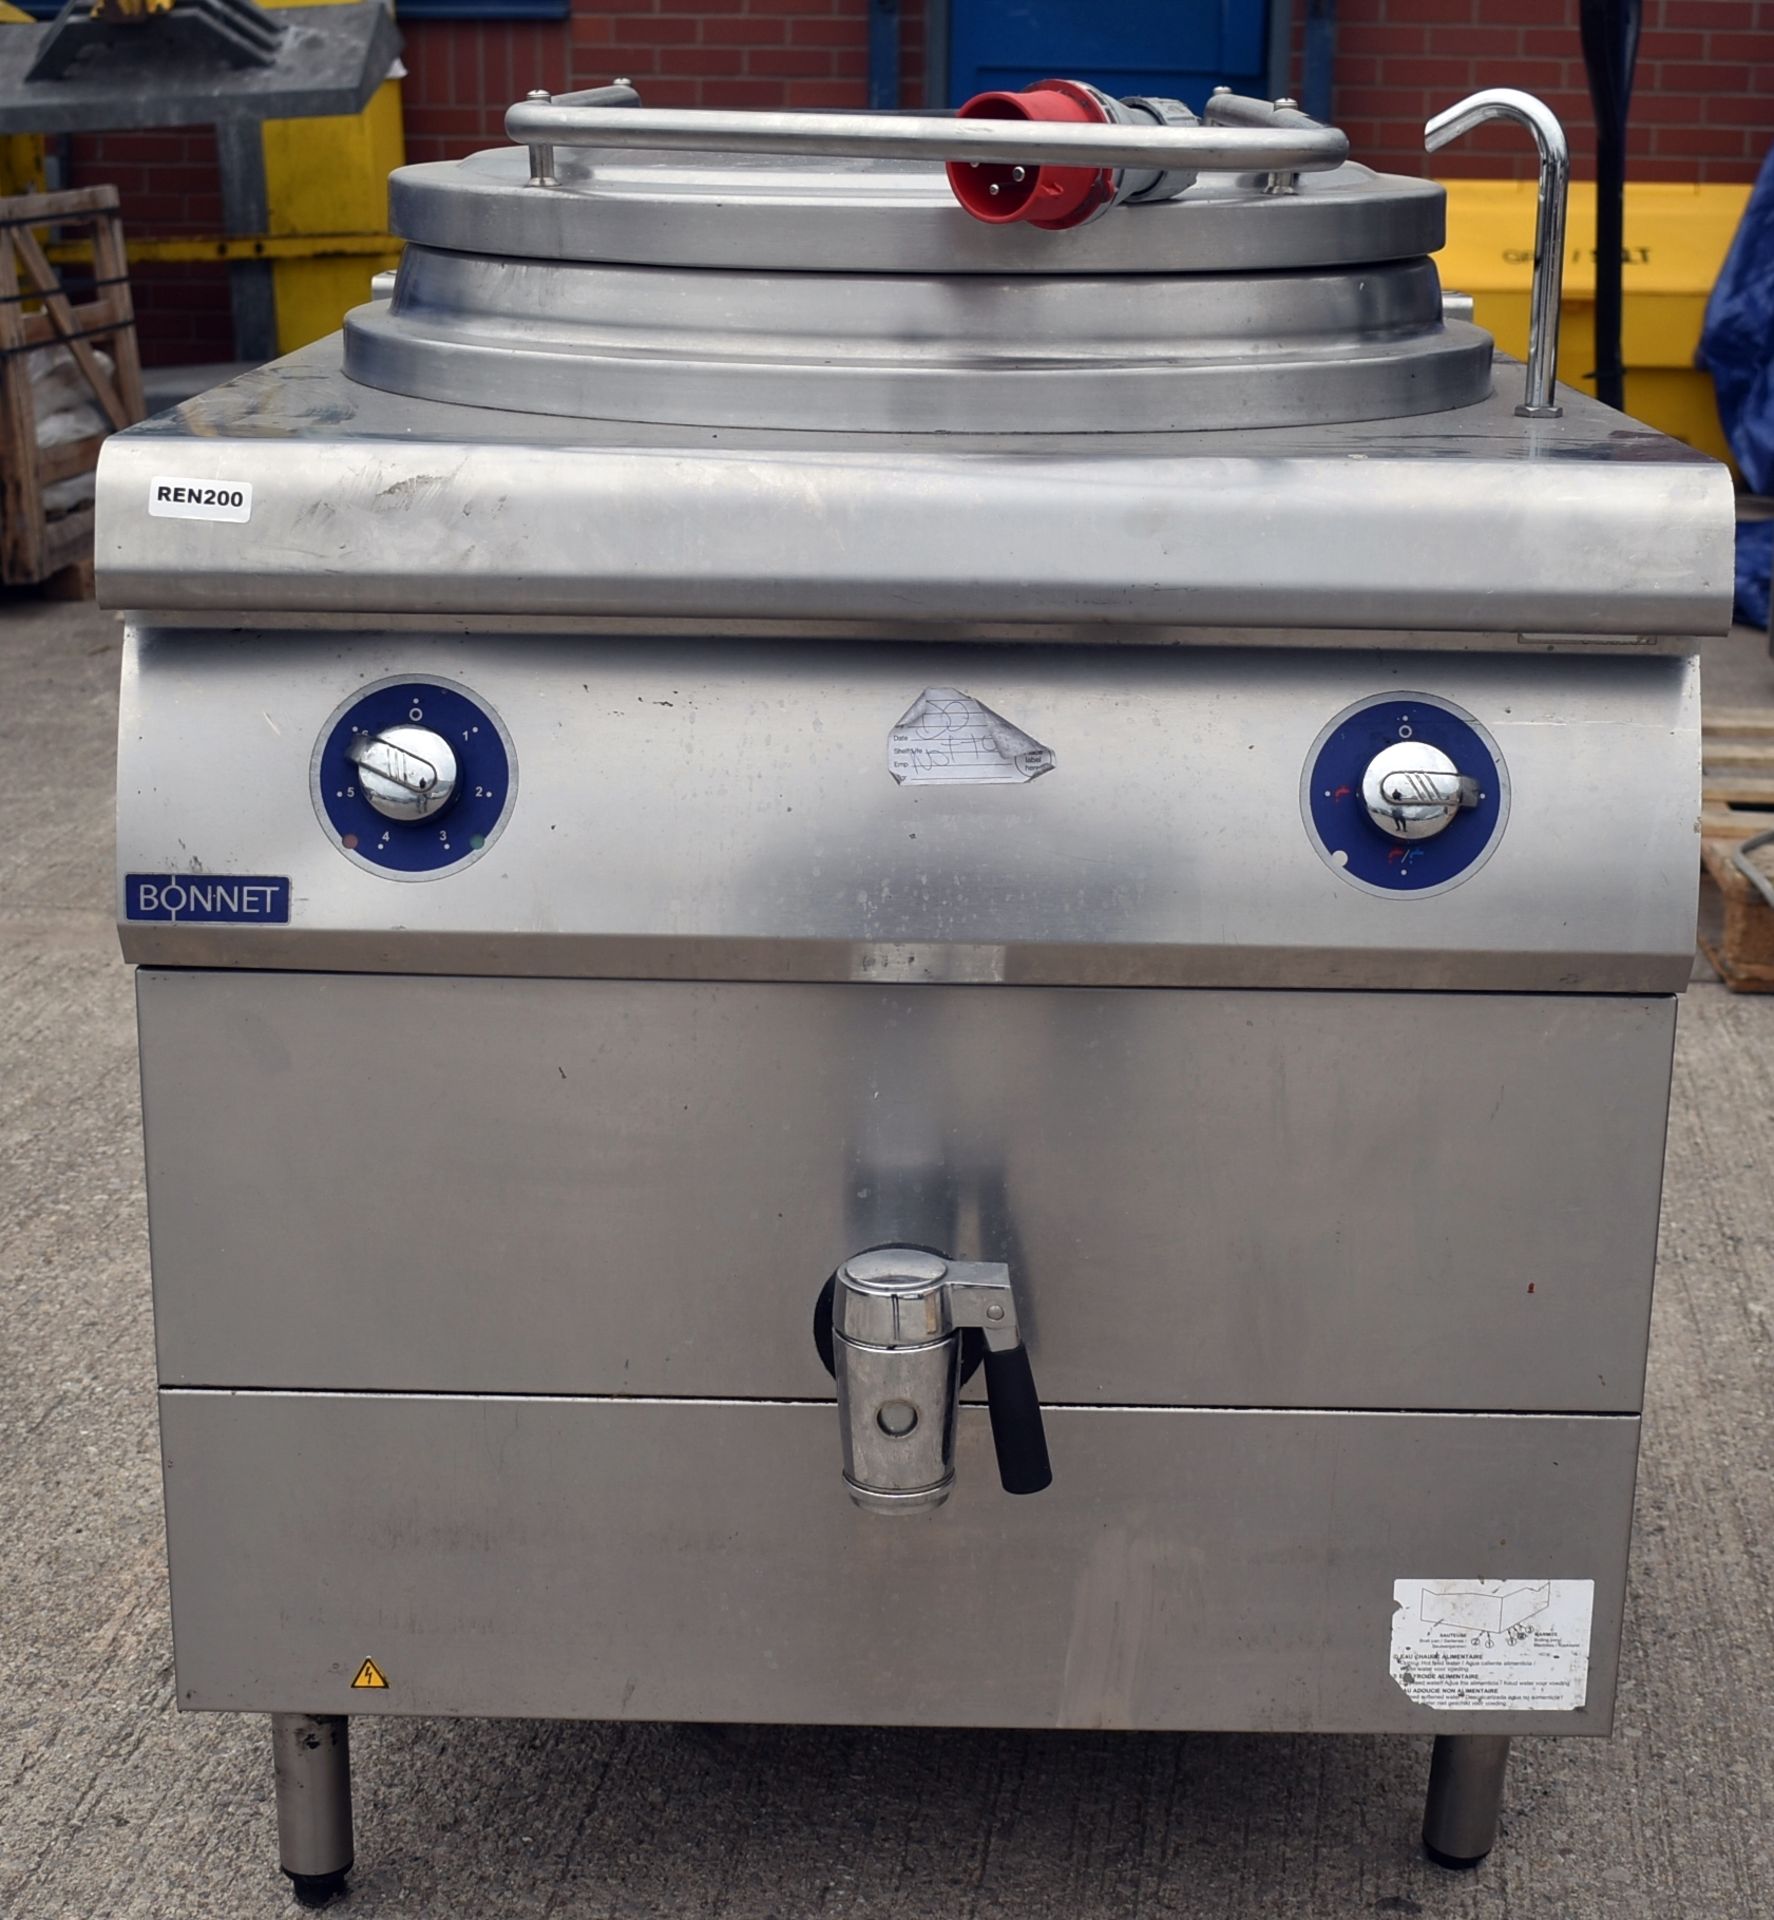 1 x Bonnet Advancia Boiling Pan With Stainless Steel Finish - 3 Phase - RRP: £8,000